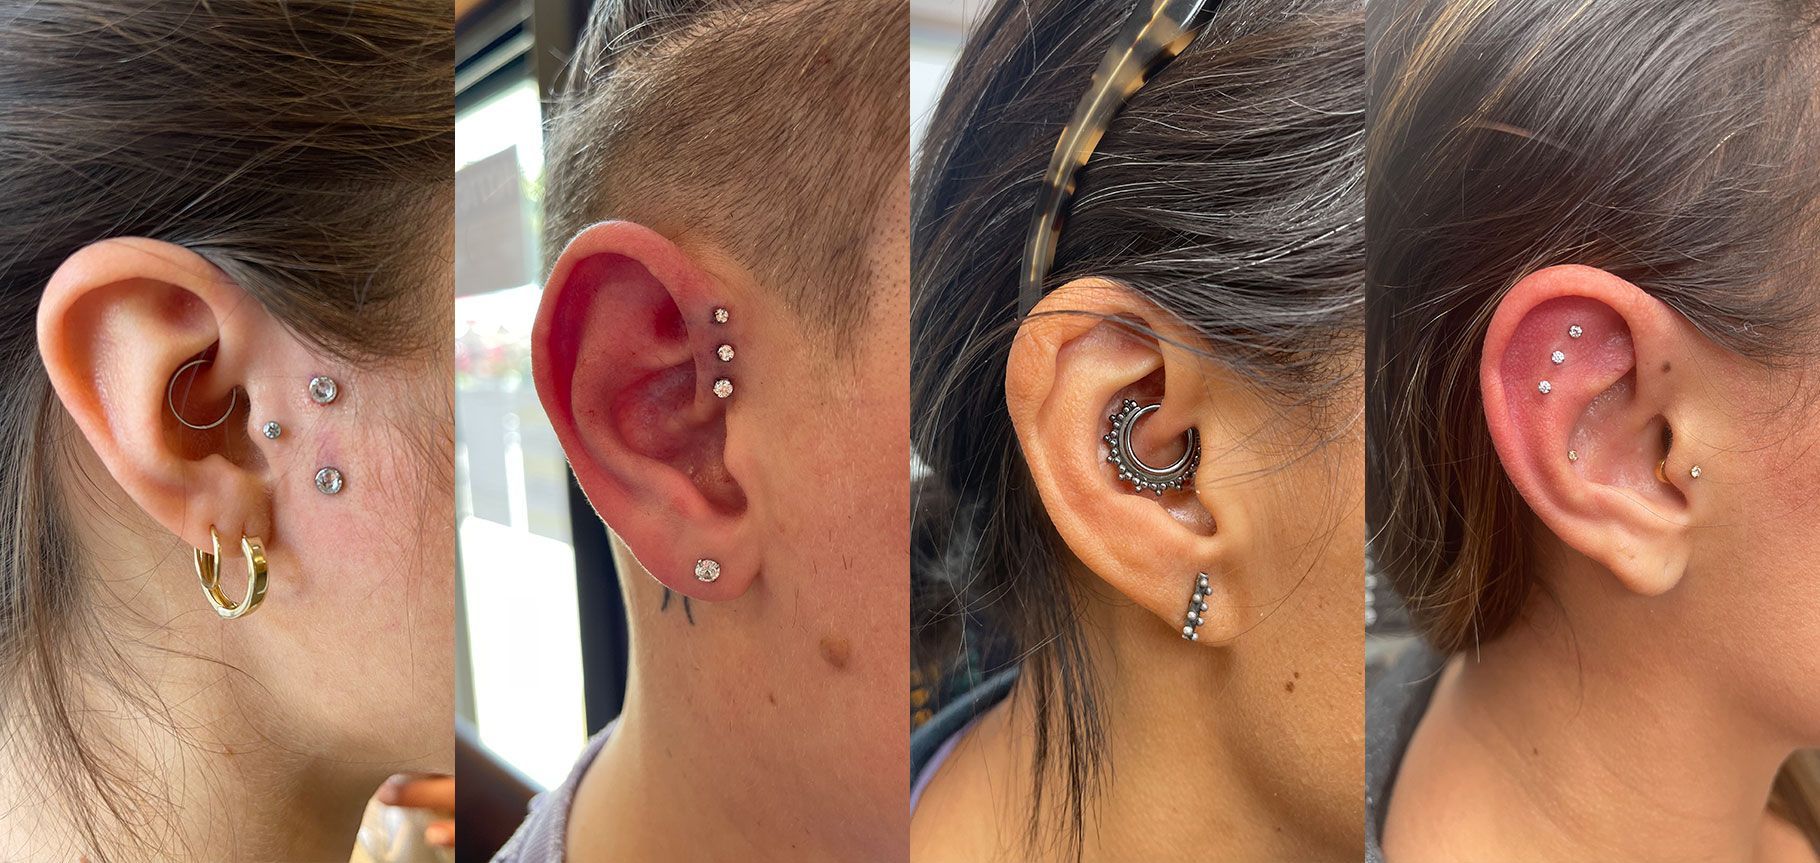 A collage of four pictures of different ear piercings